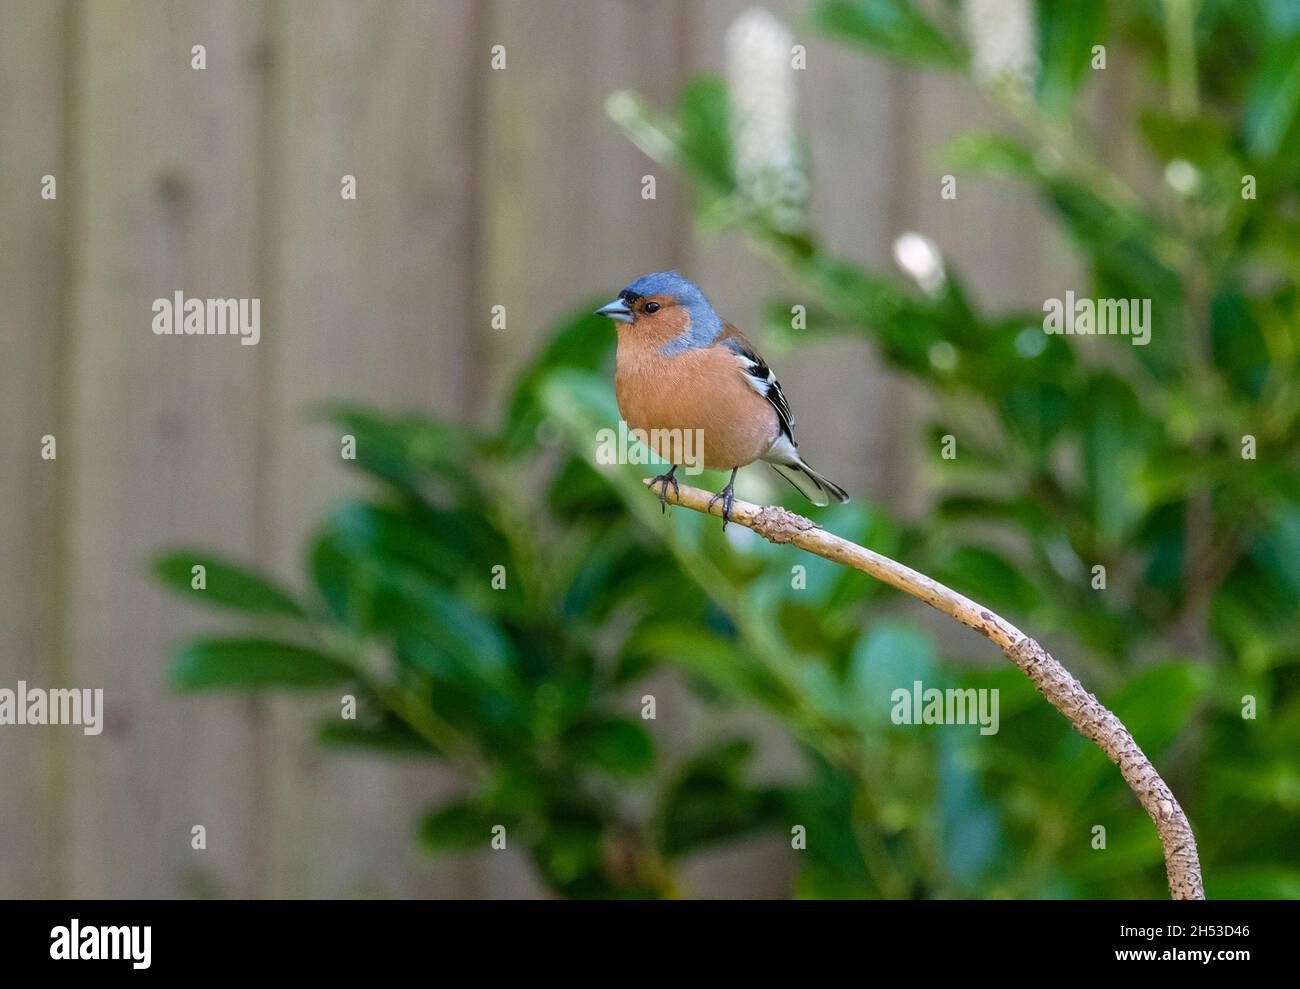 Chaffinch perched on branch in a Spring garden, Dorset, England, UK Stock Photo